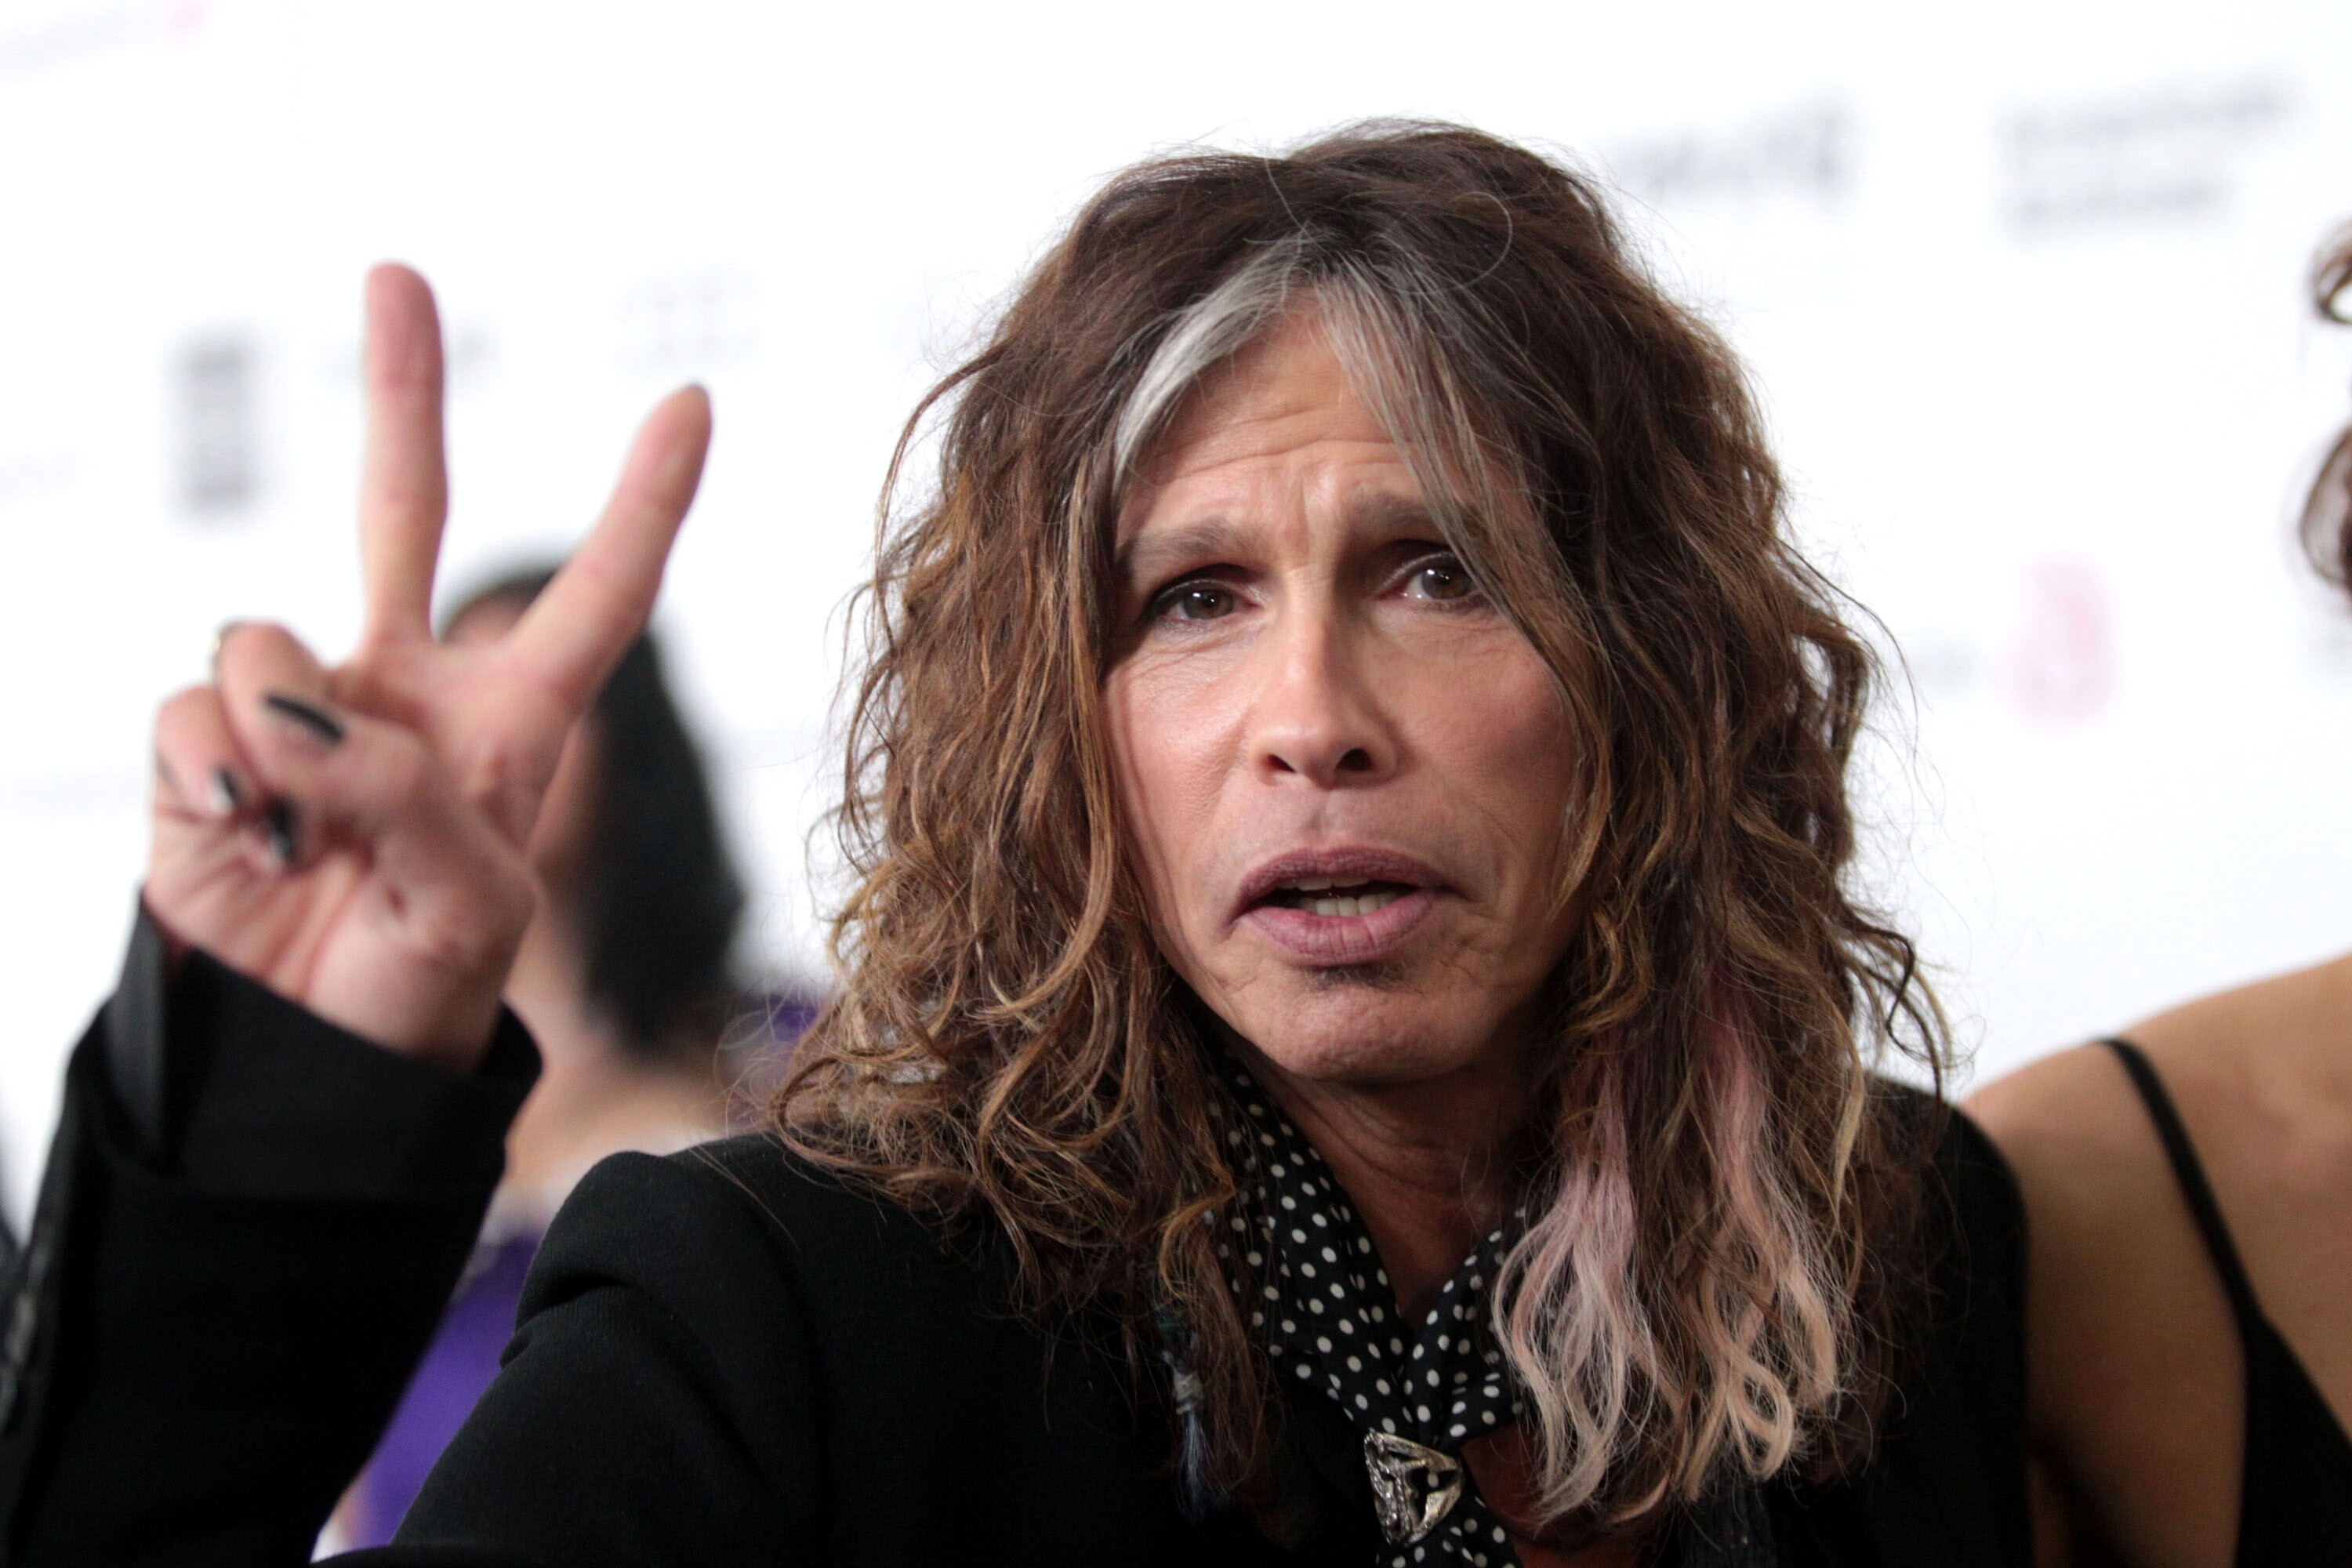 Aerosmith: Steven Tyler, known as the "Demon of Screamin'" due to his high screams and his powerful wide vocal range. 3000x2000 HD Wallpaper.